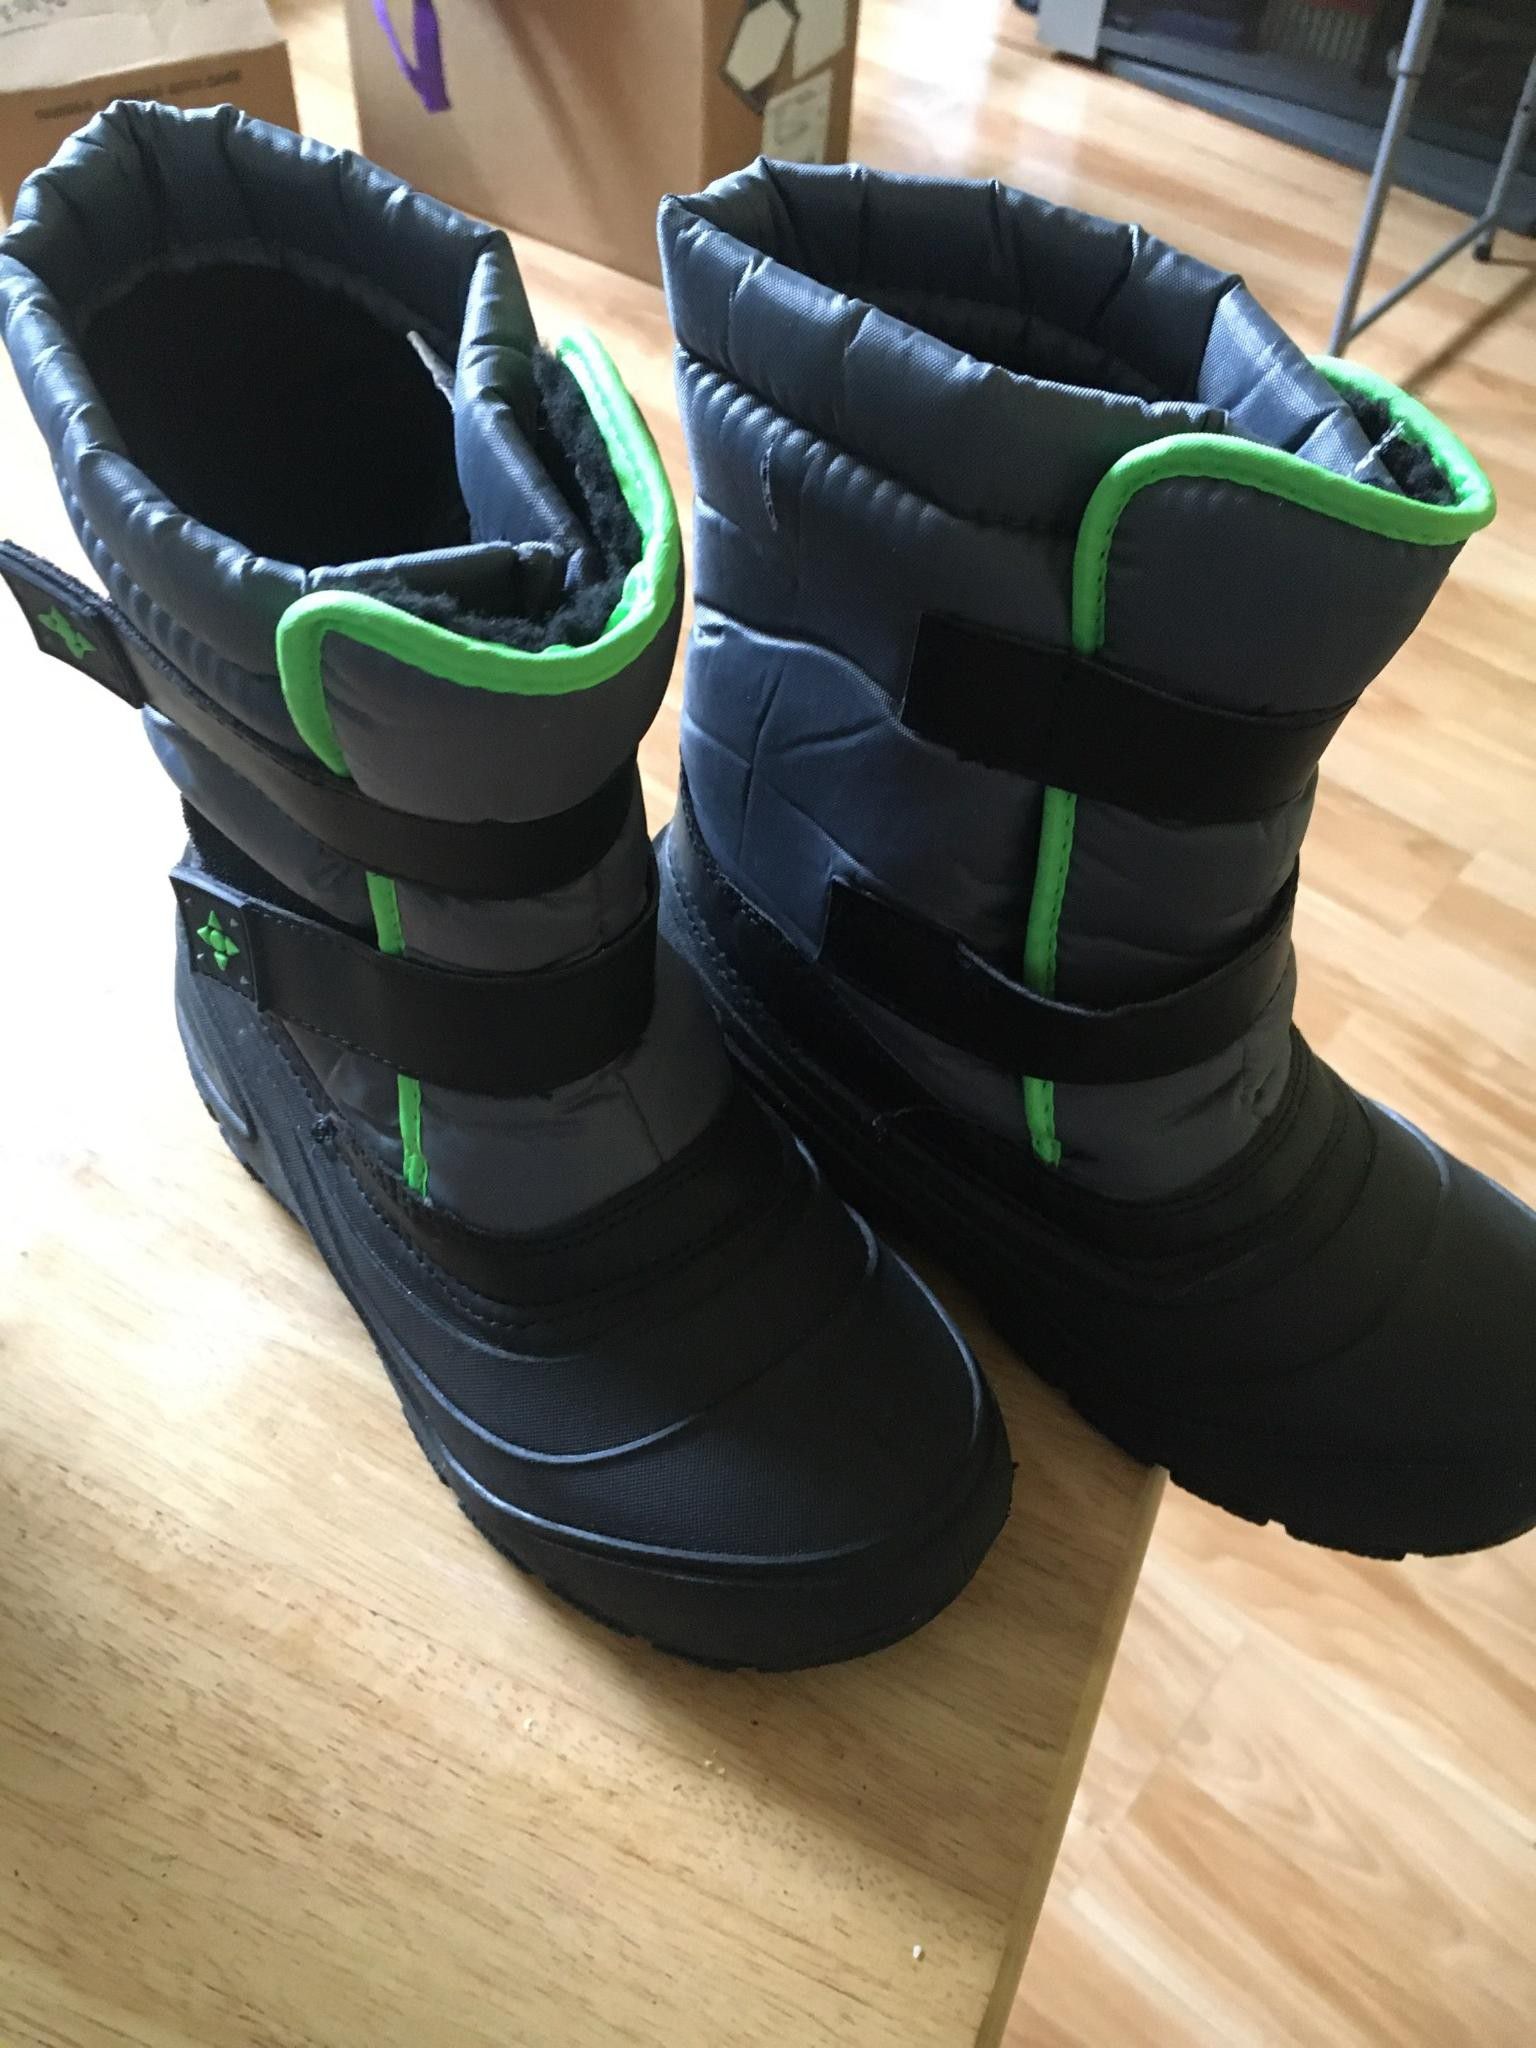 Boys size 3 snow boots- worn once only